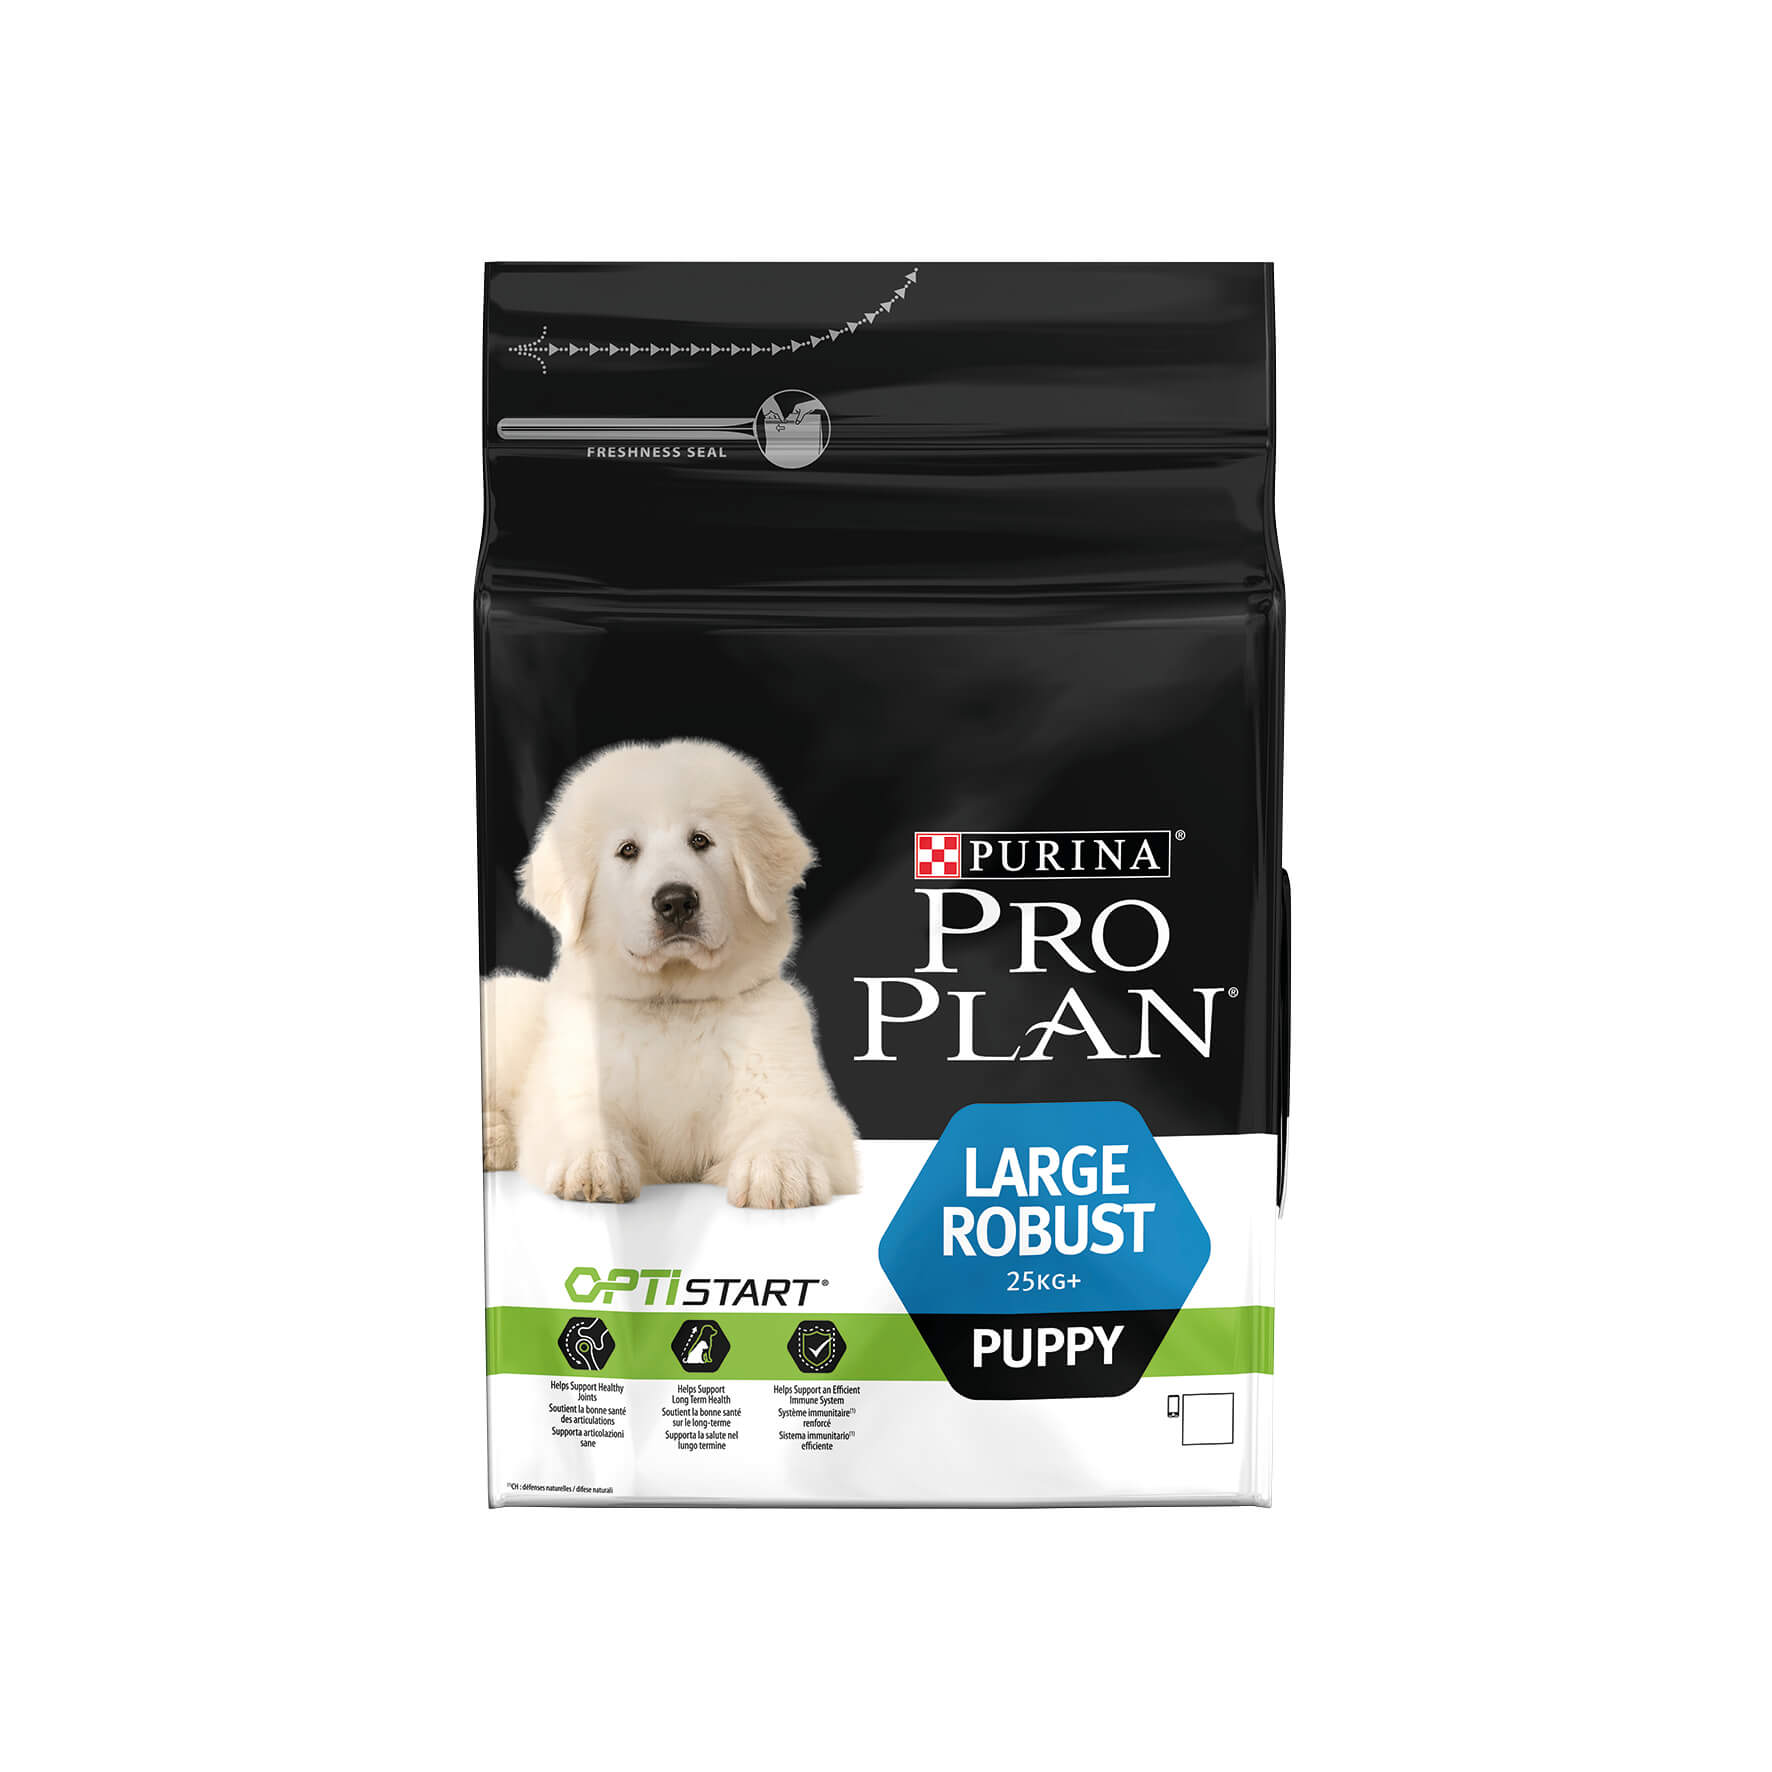 Pro Plan Large Puppy Robust